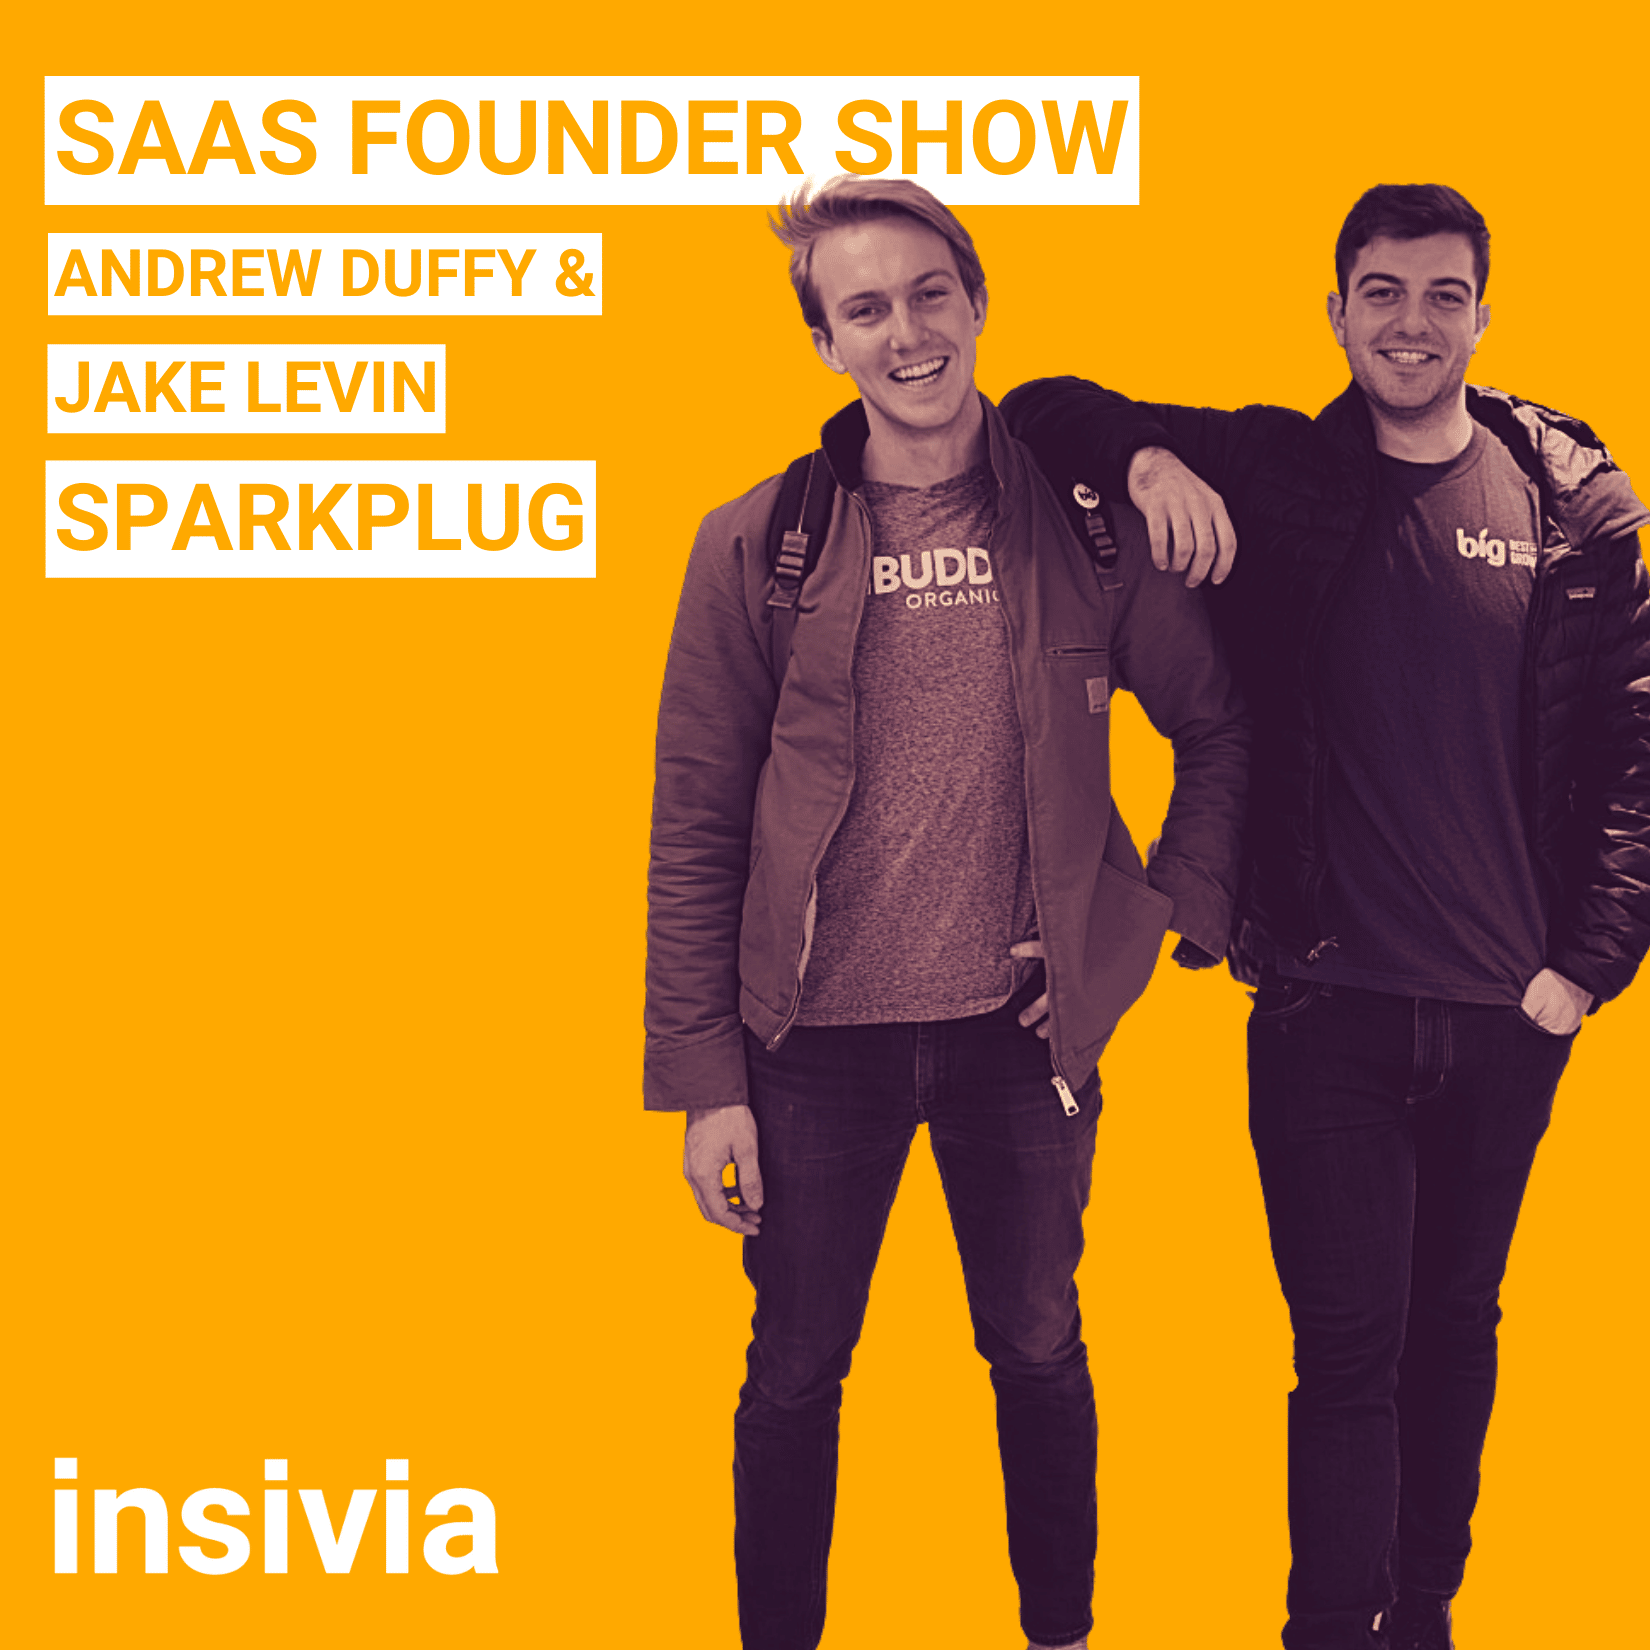 Andrew Duffy and Jake Levin, Co-Founders @ SparkPlug: Curating their Perfect SaaS Product with the Perfect Team